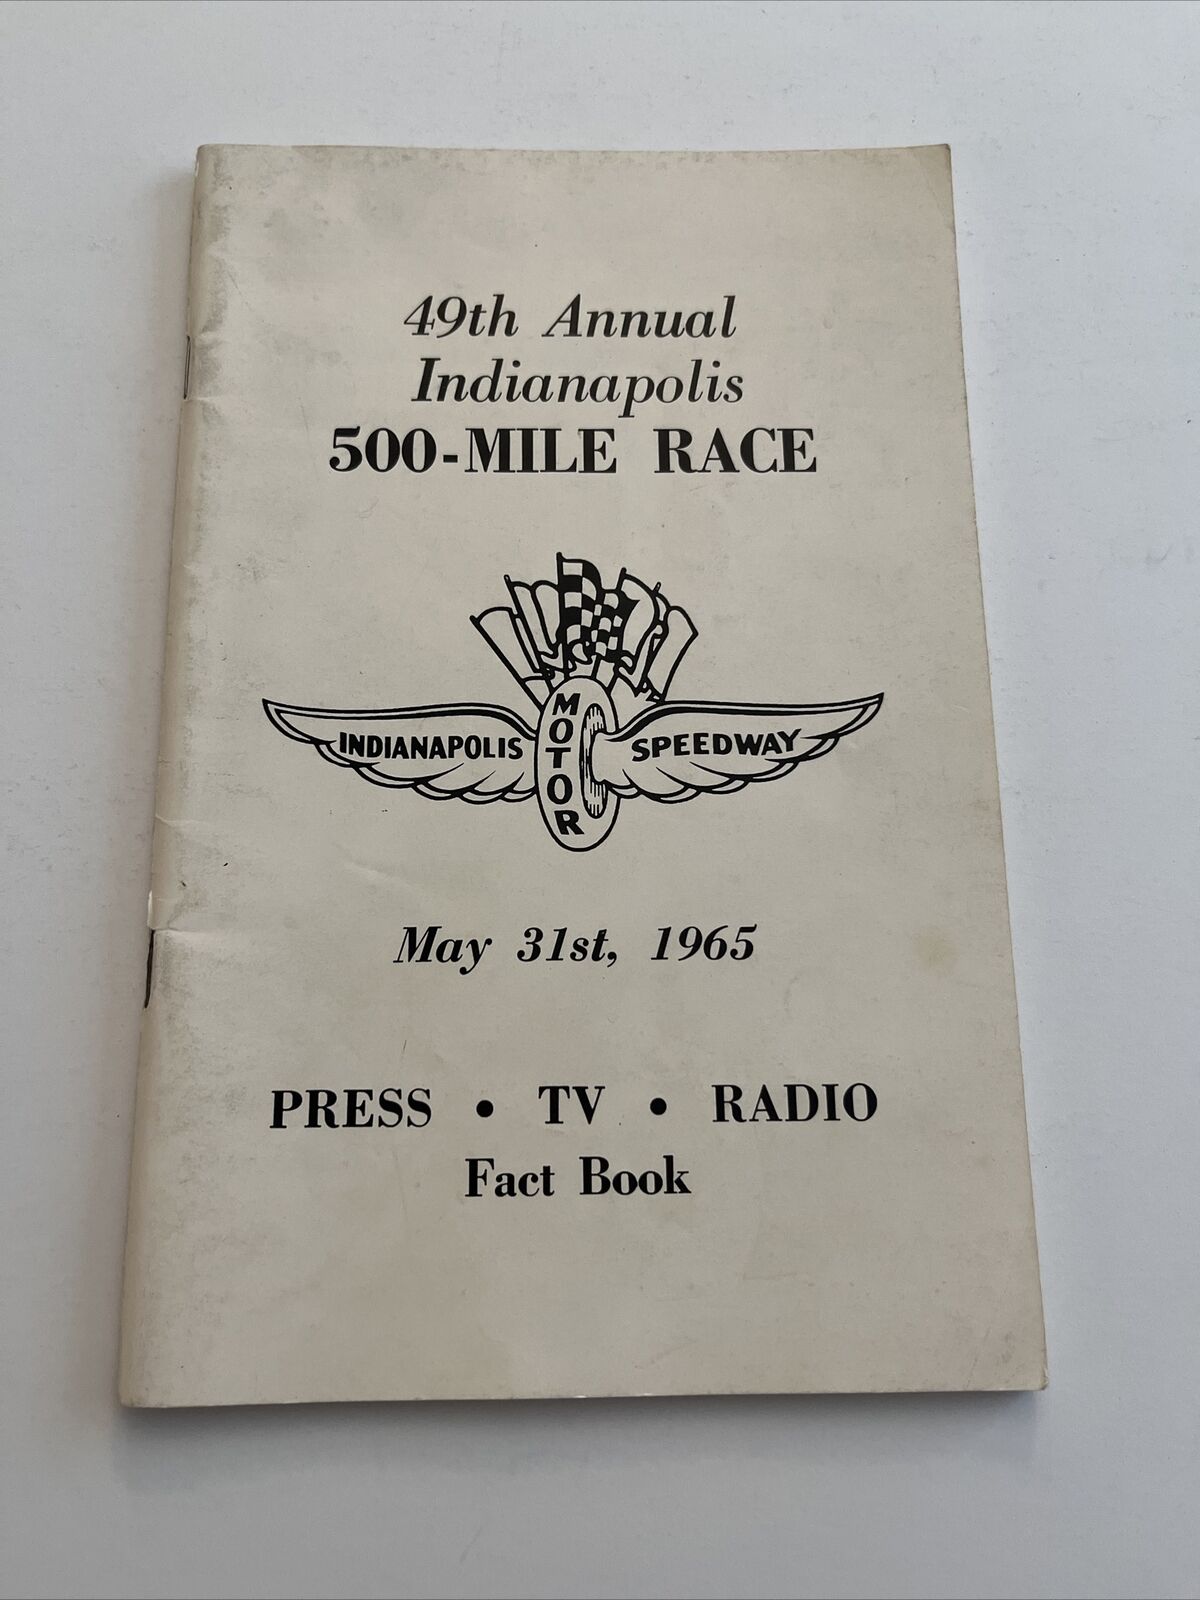 1965 Race Program: 49th Annual Indianapolis 500-Mile Race